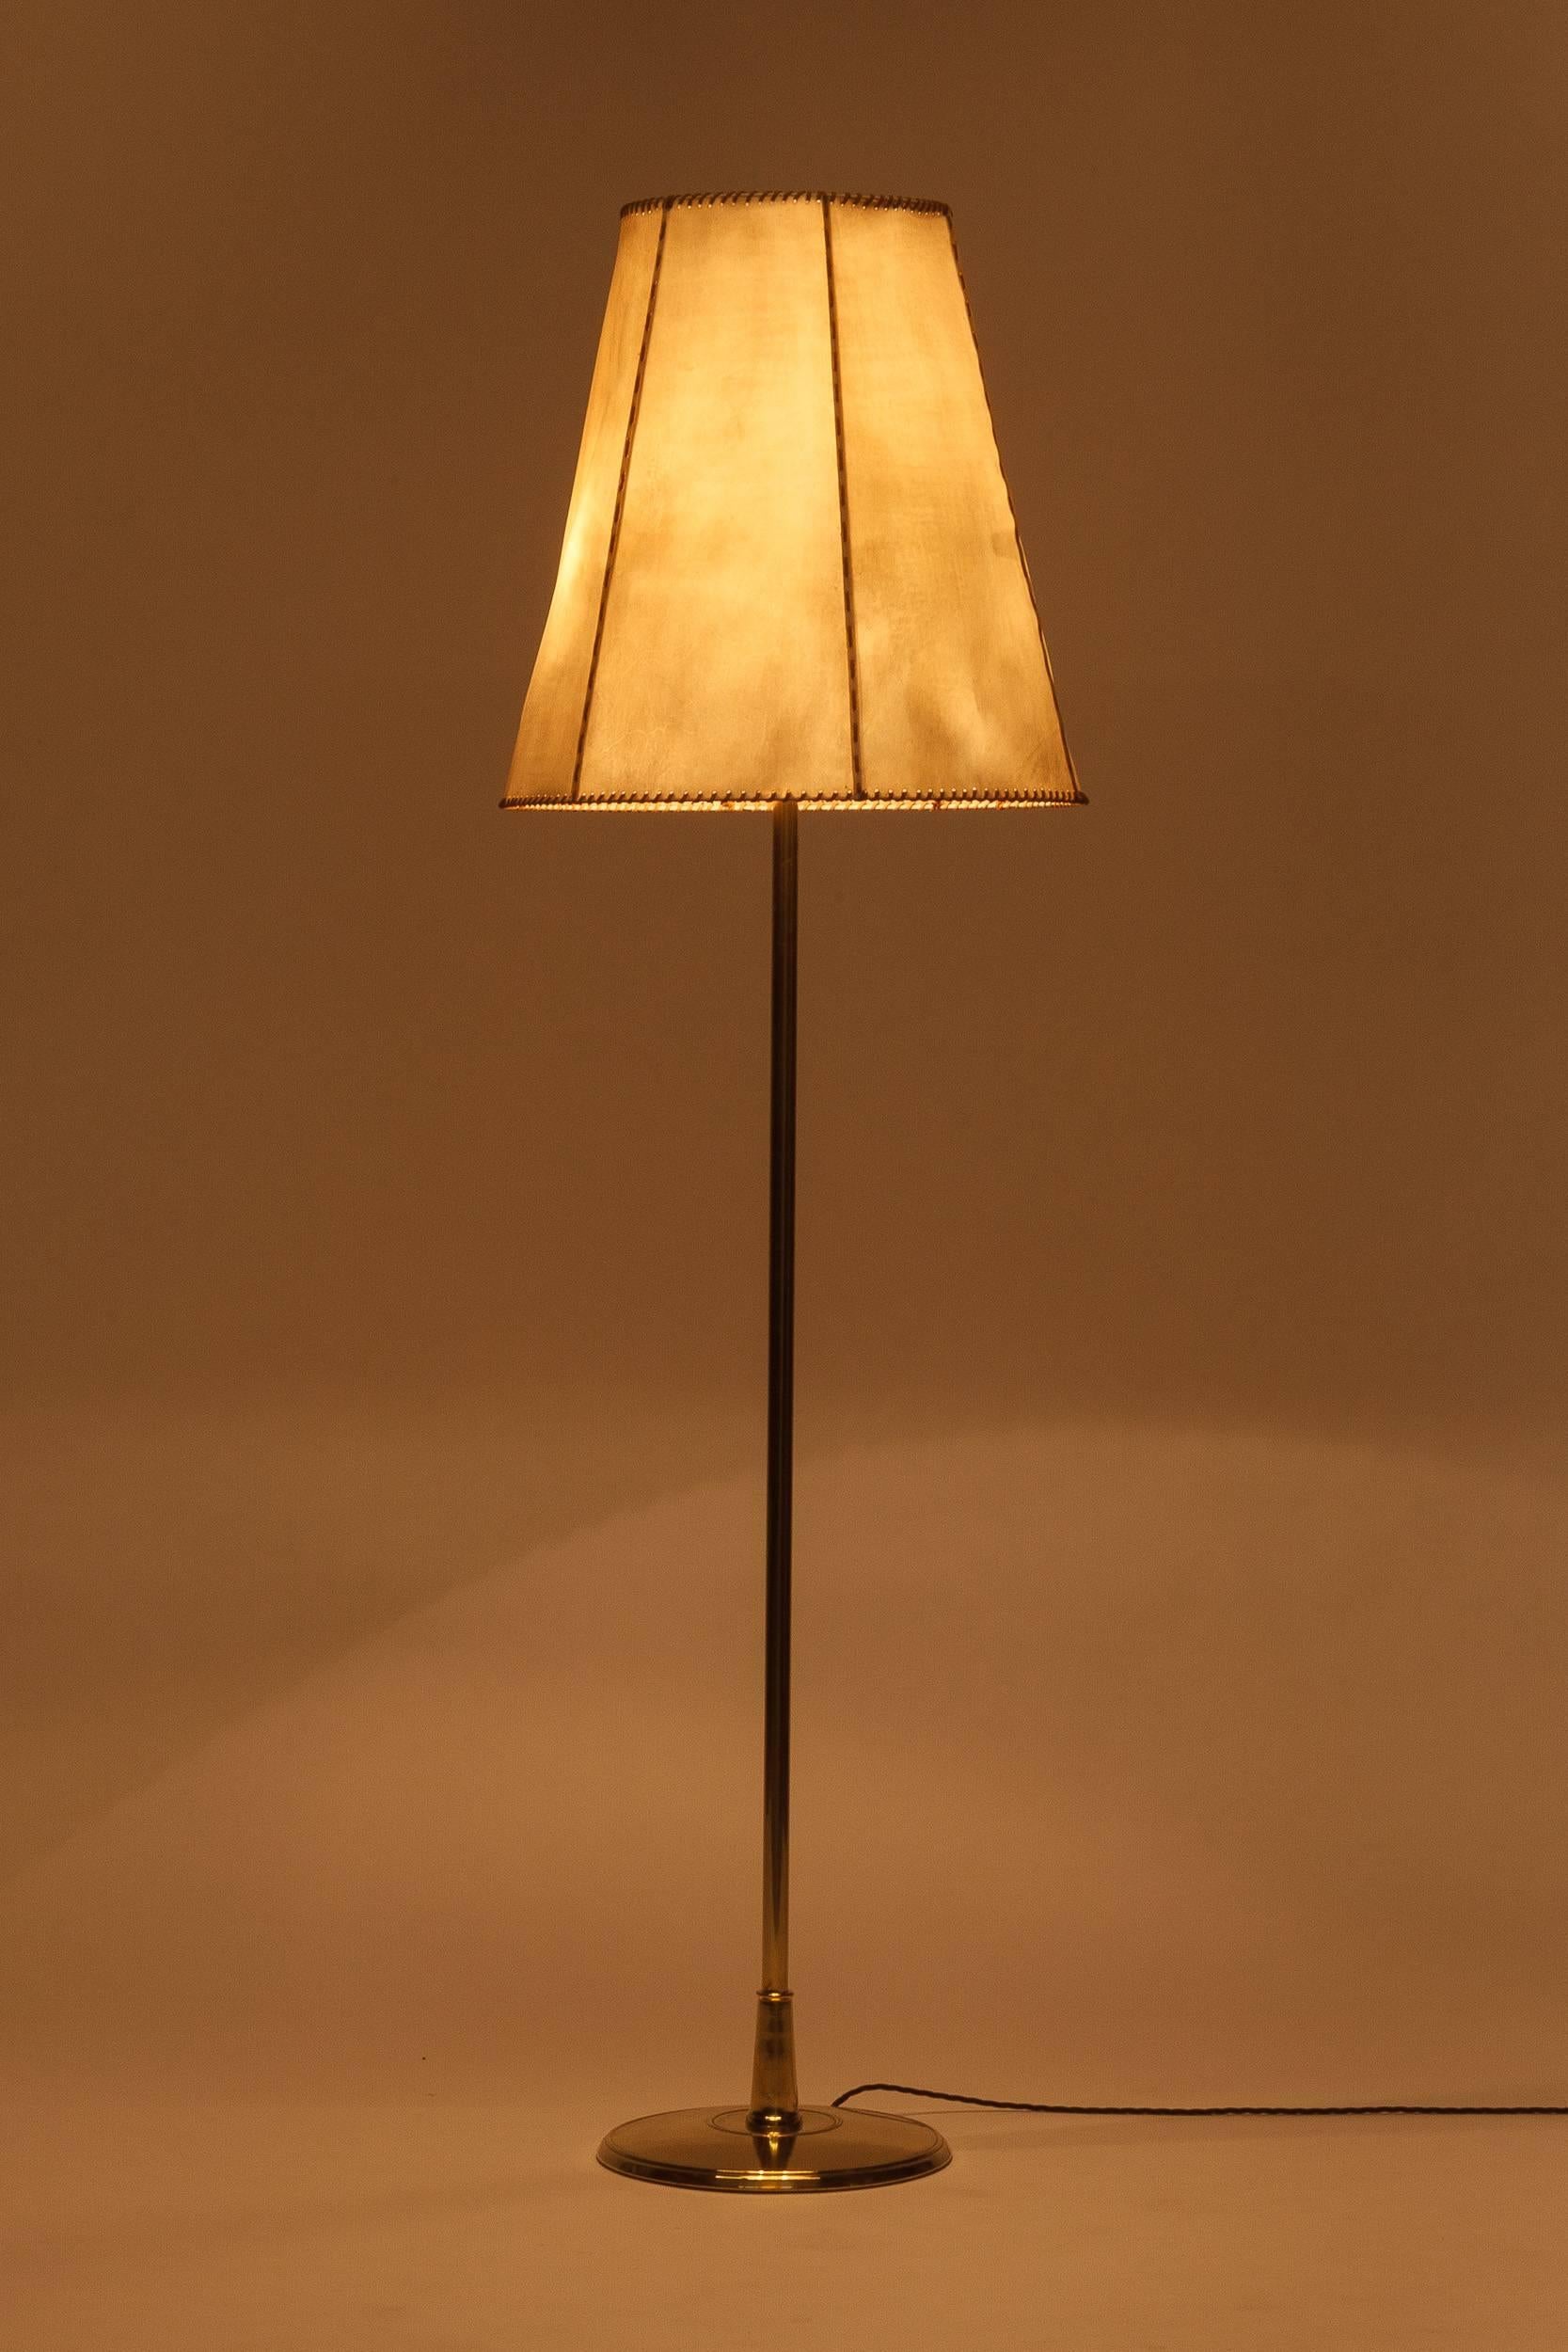 Swiss floor lamp model 454 manufactured by Eberth in Zurich in the 1940s. Beautiful original shade made of cow hide with a buckskin ribbon on the border. One uplight and two bulbs to illuminate the shade. The stem is made of brass, newly polished,